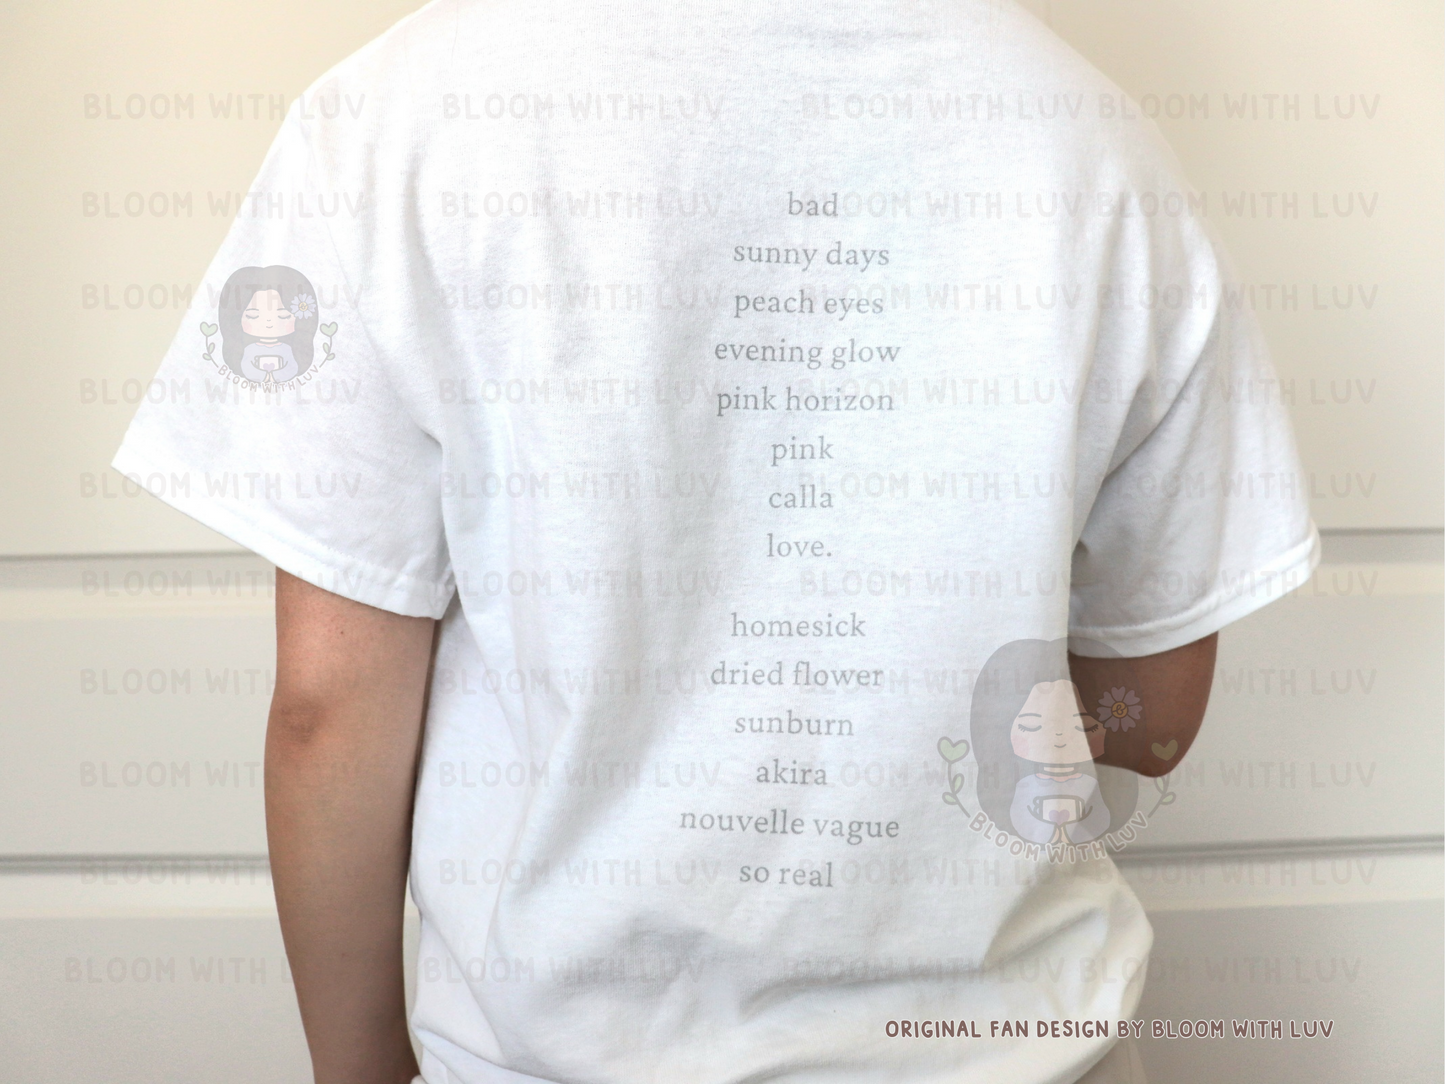 Wave to Earth - "0.1 flaws and all." Album Tracklist T-Shirt